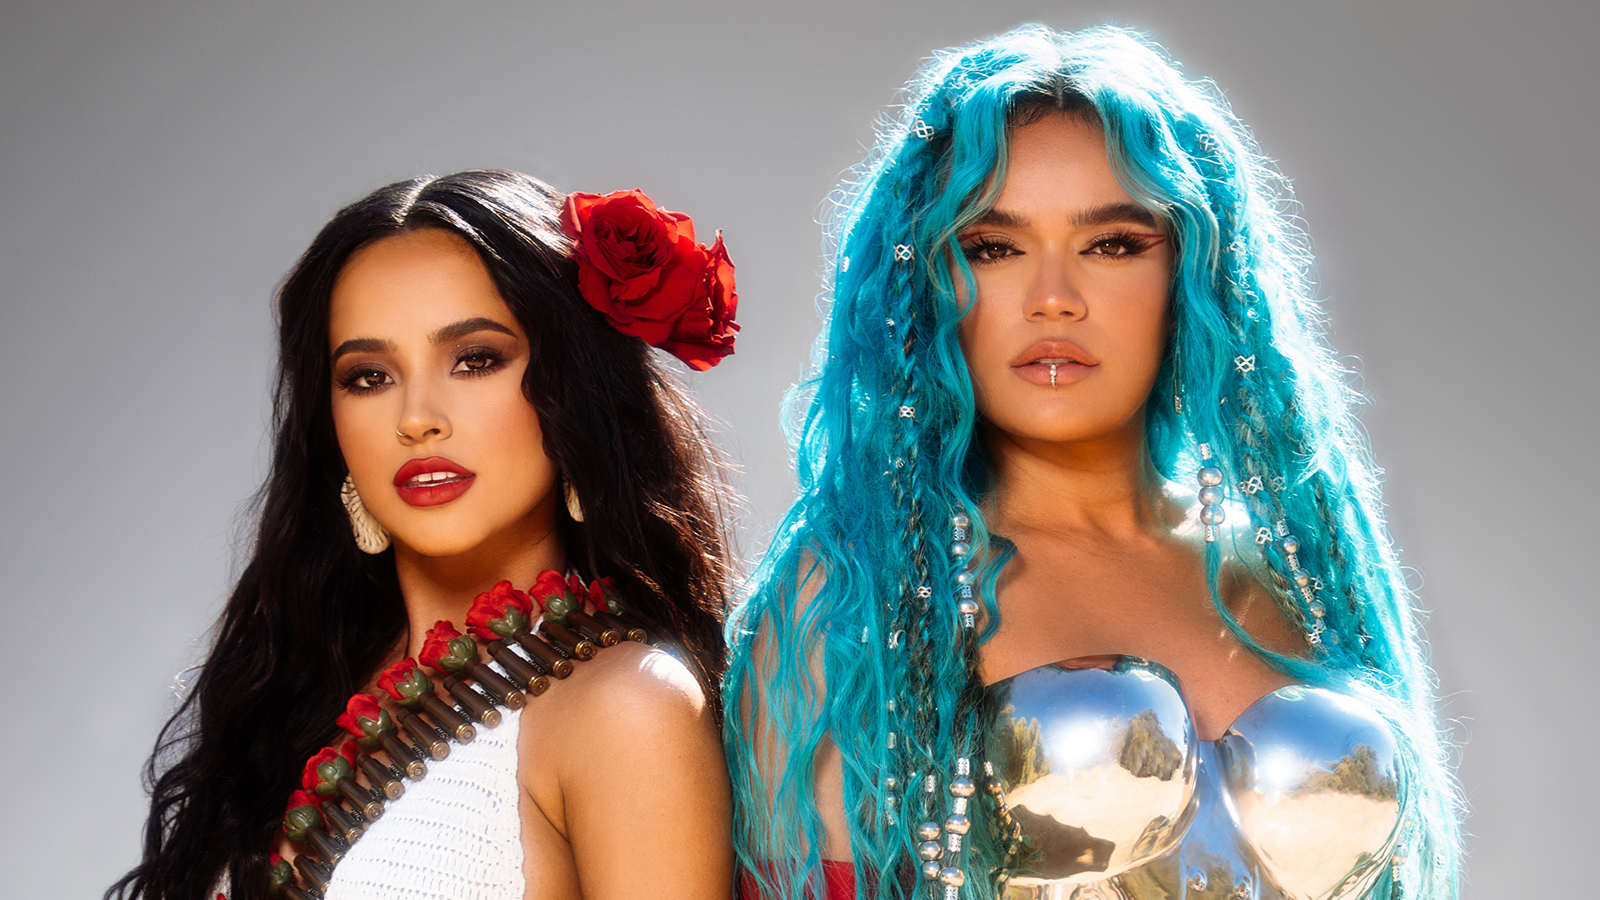 Musical premieres: Becky G and Karol G sing to all the “Mamiii”